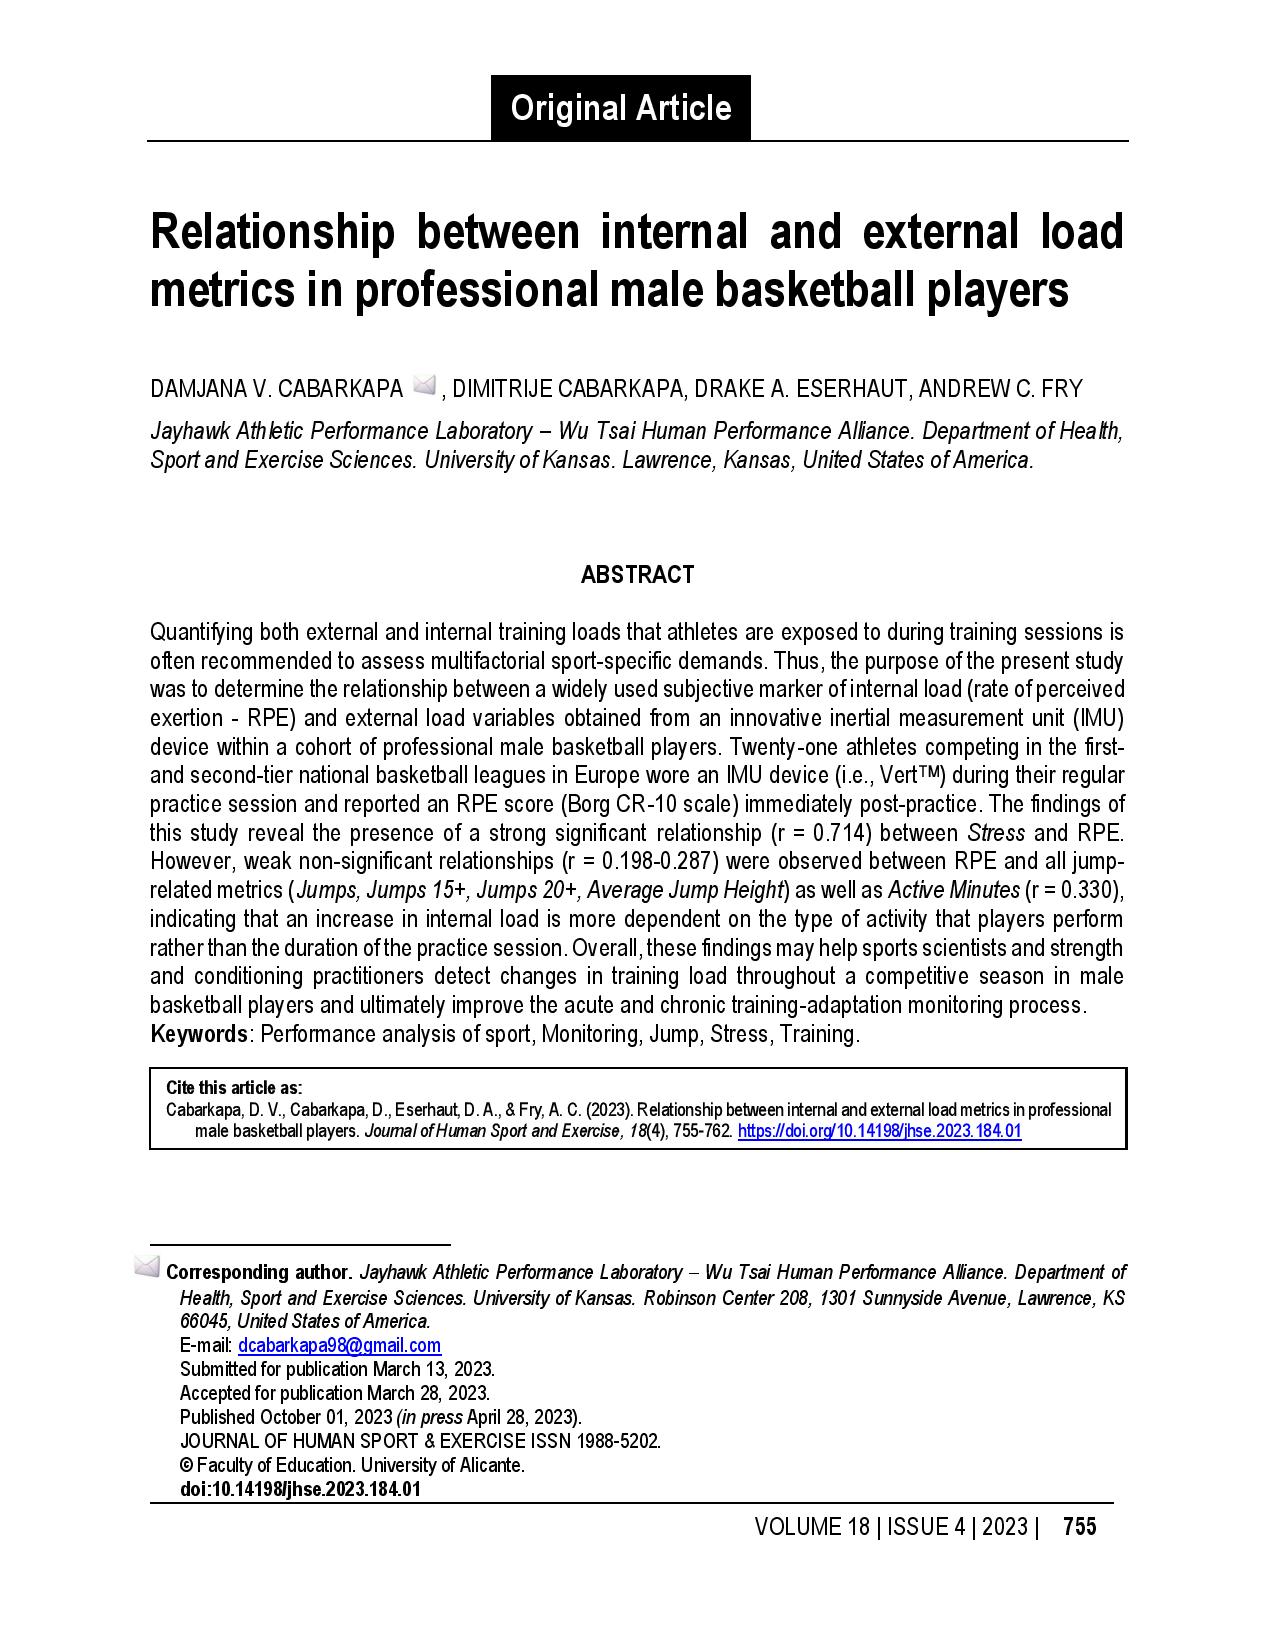 Relationship between internal and external load metrics in professional male basketball players